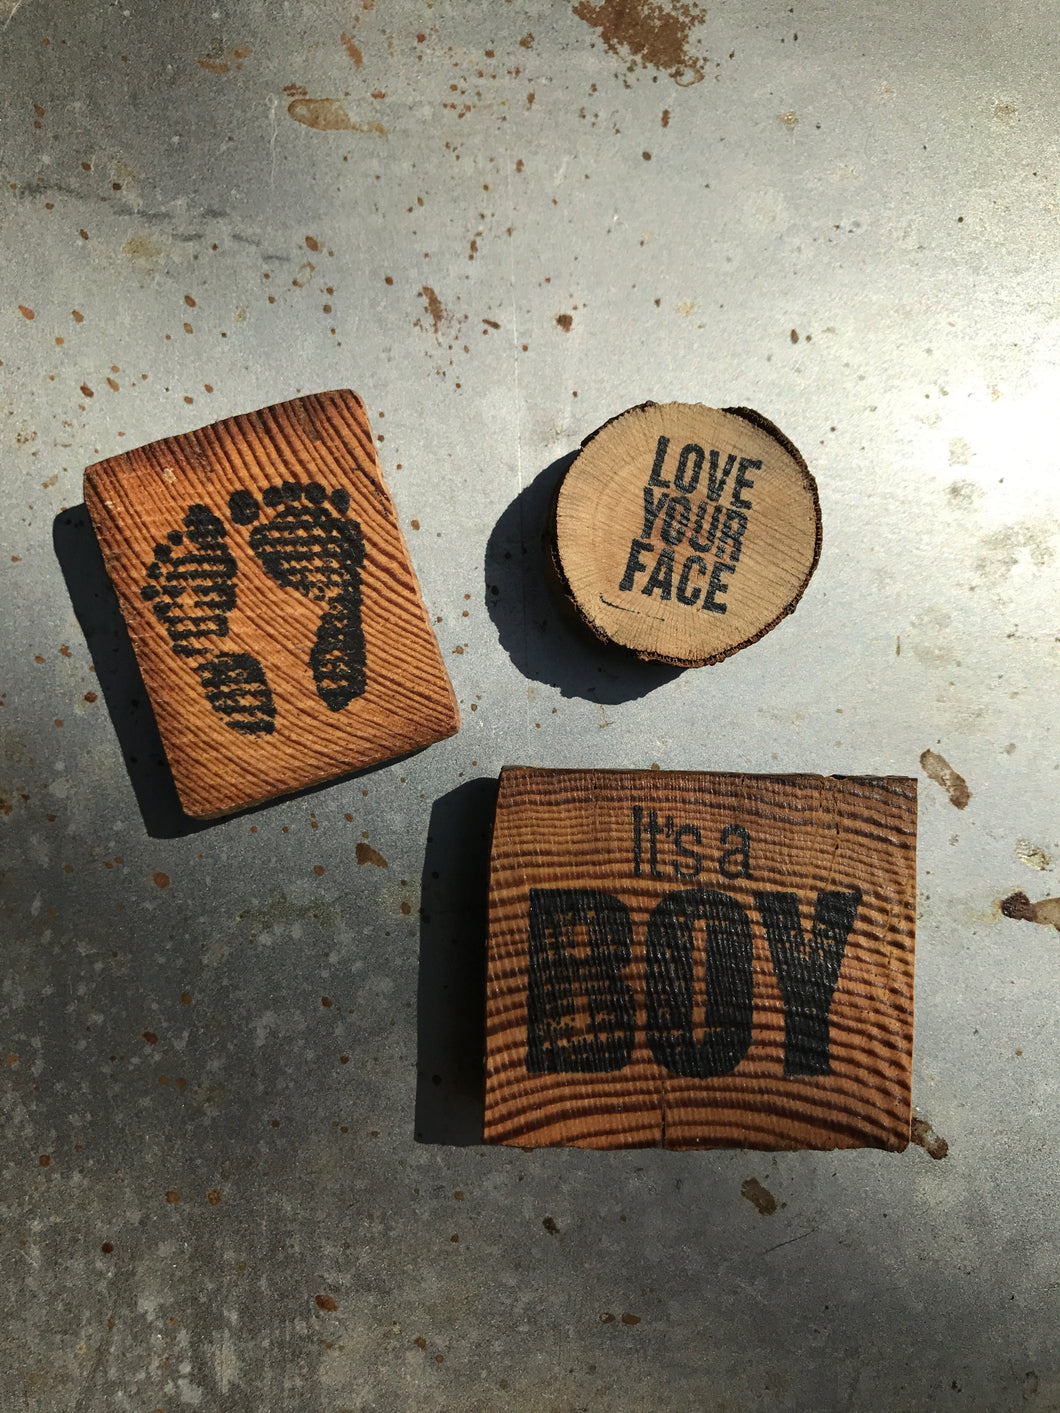 It's A Boy / Love Your Face / Baby Feet (Set of 3) - Upcycled Hand-made Wood Magnets